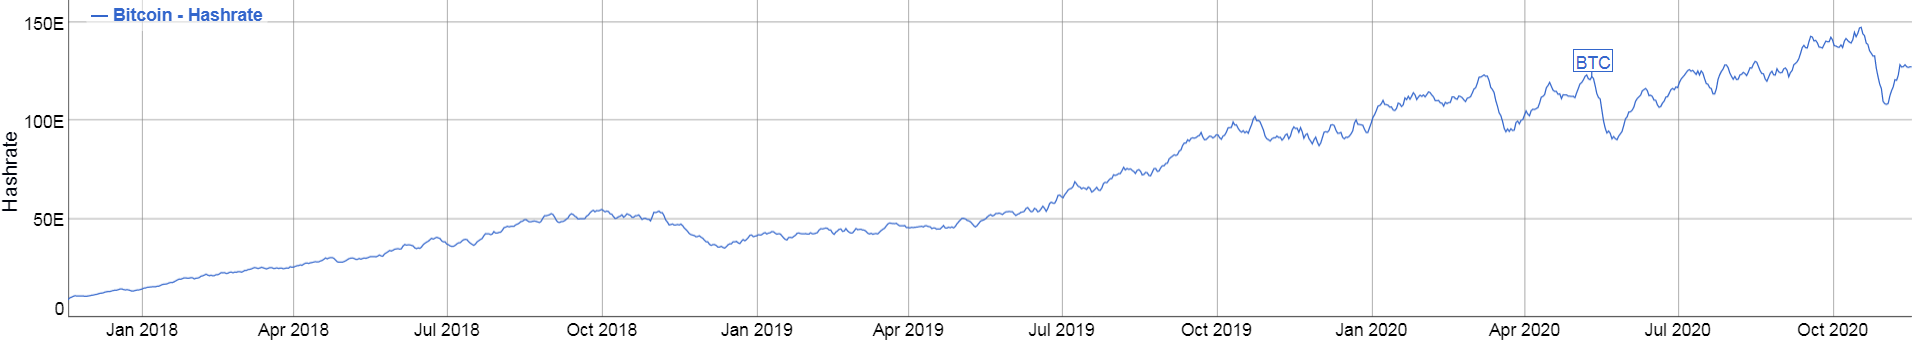 Market chart showing Bitcoin Hashrate. Published in November 2020